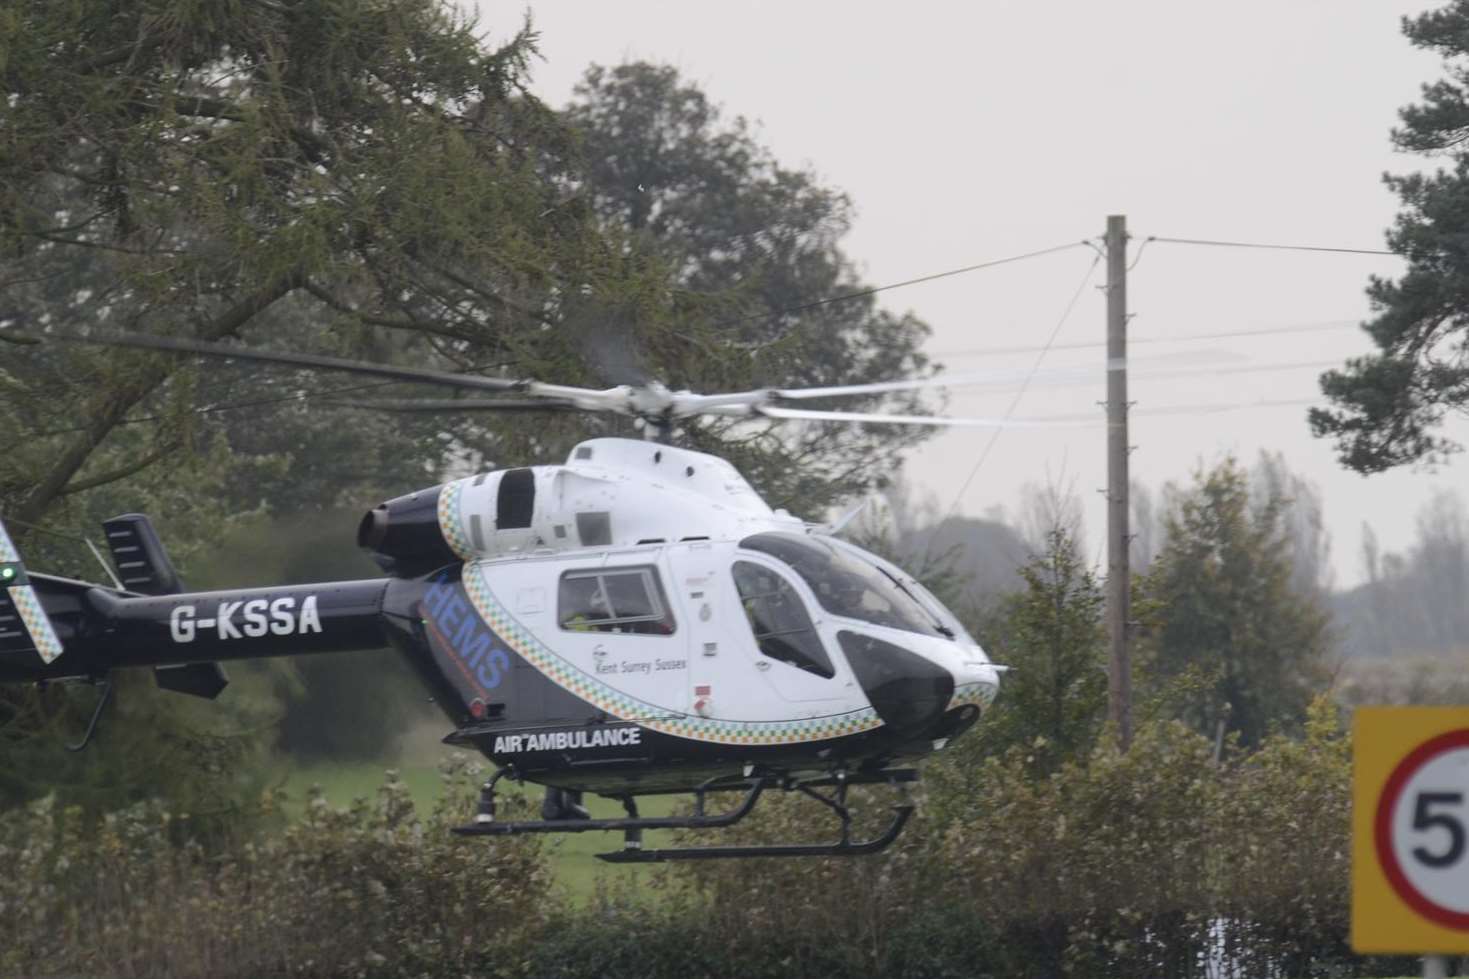 Two air ambulances have been spotted at the scene of the crash